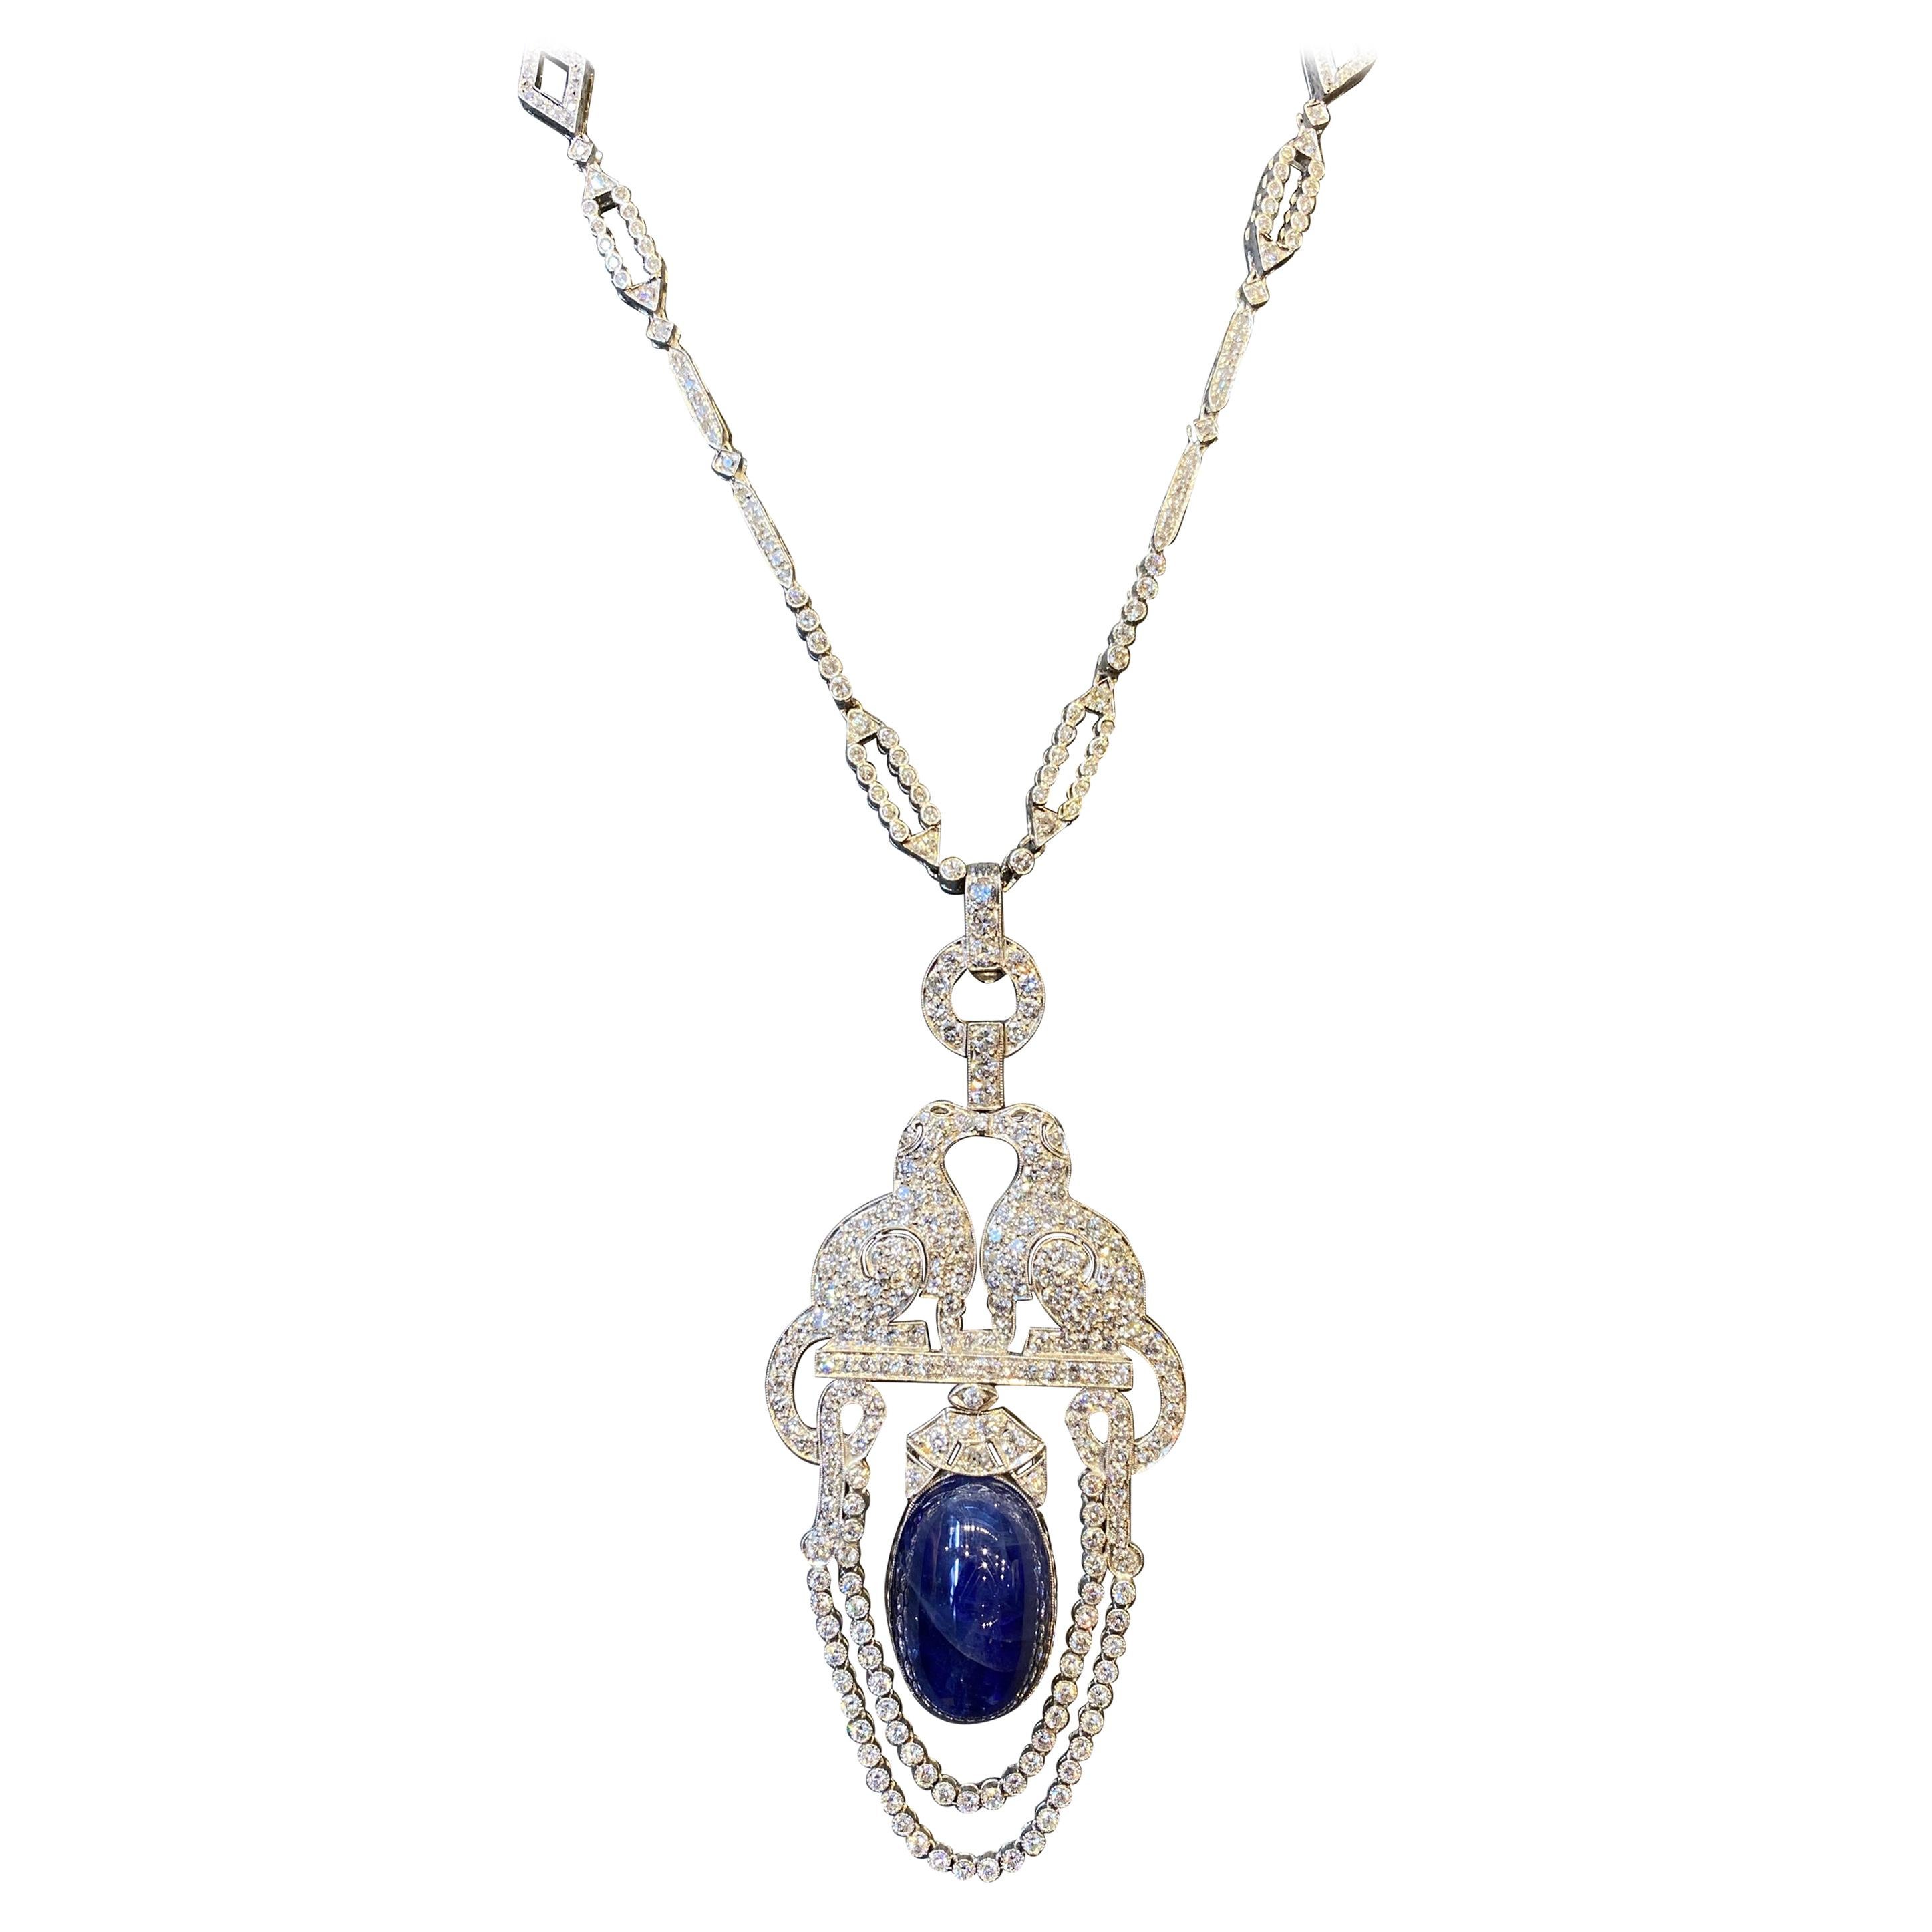 Sapphire & Diamond Sautoir Necklace
1 large cabochon sapphire weighing approximately 34.30 carats
Approximately 8 carats of diamonds
Pendant has two stylized diamond dogs facing each other
Set in platinum & 18k white gold.
Chain Measurements: 18